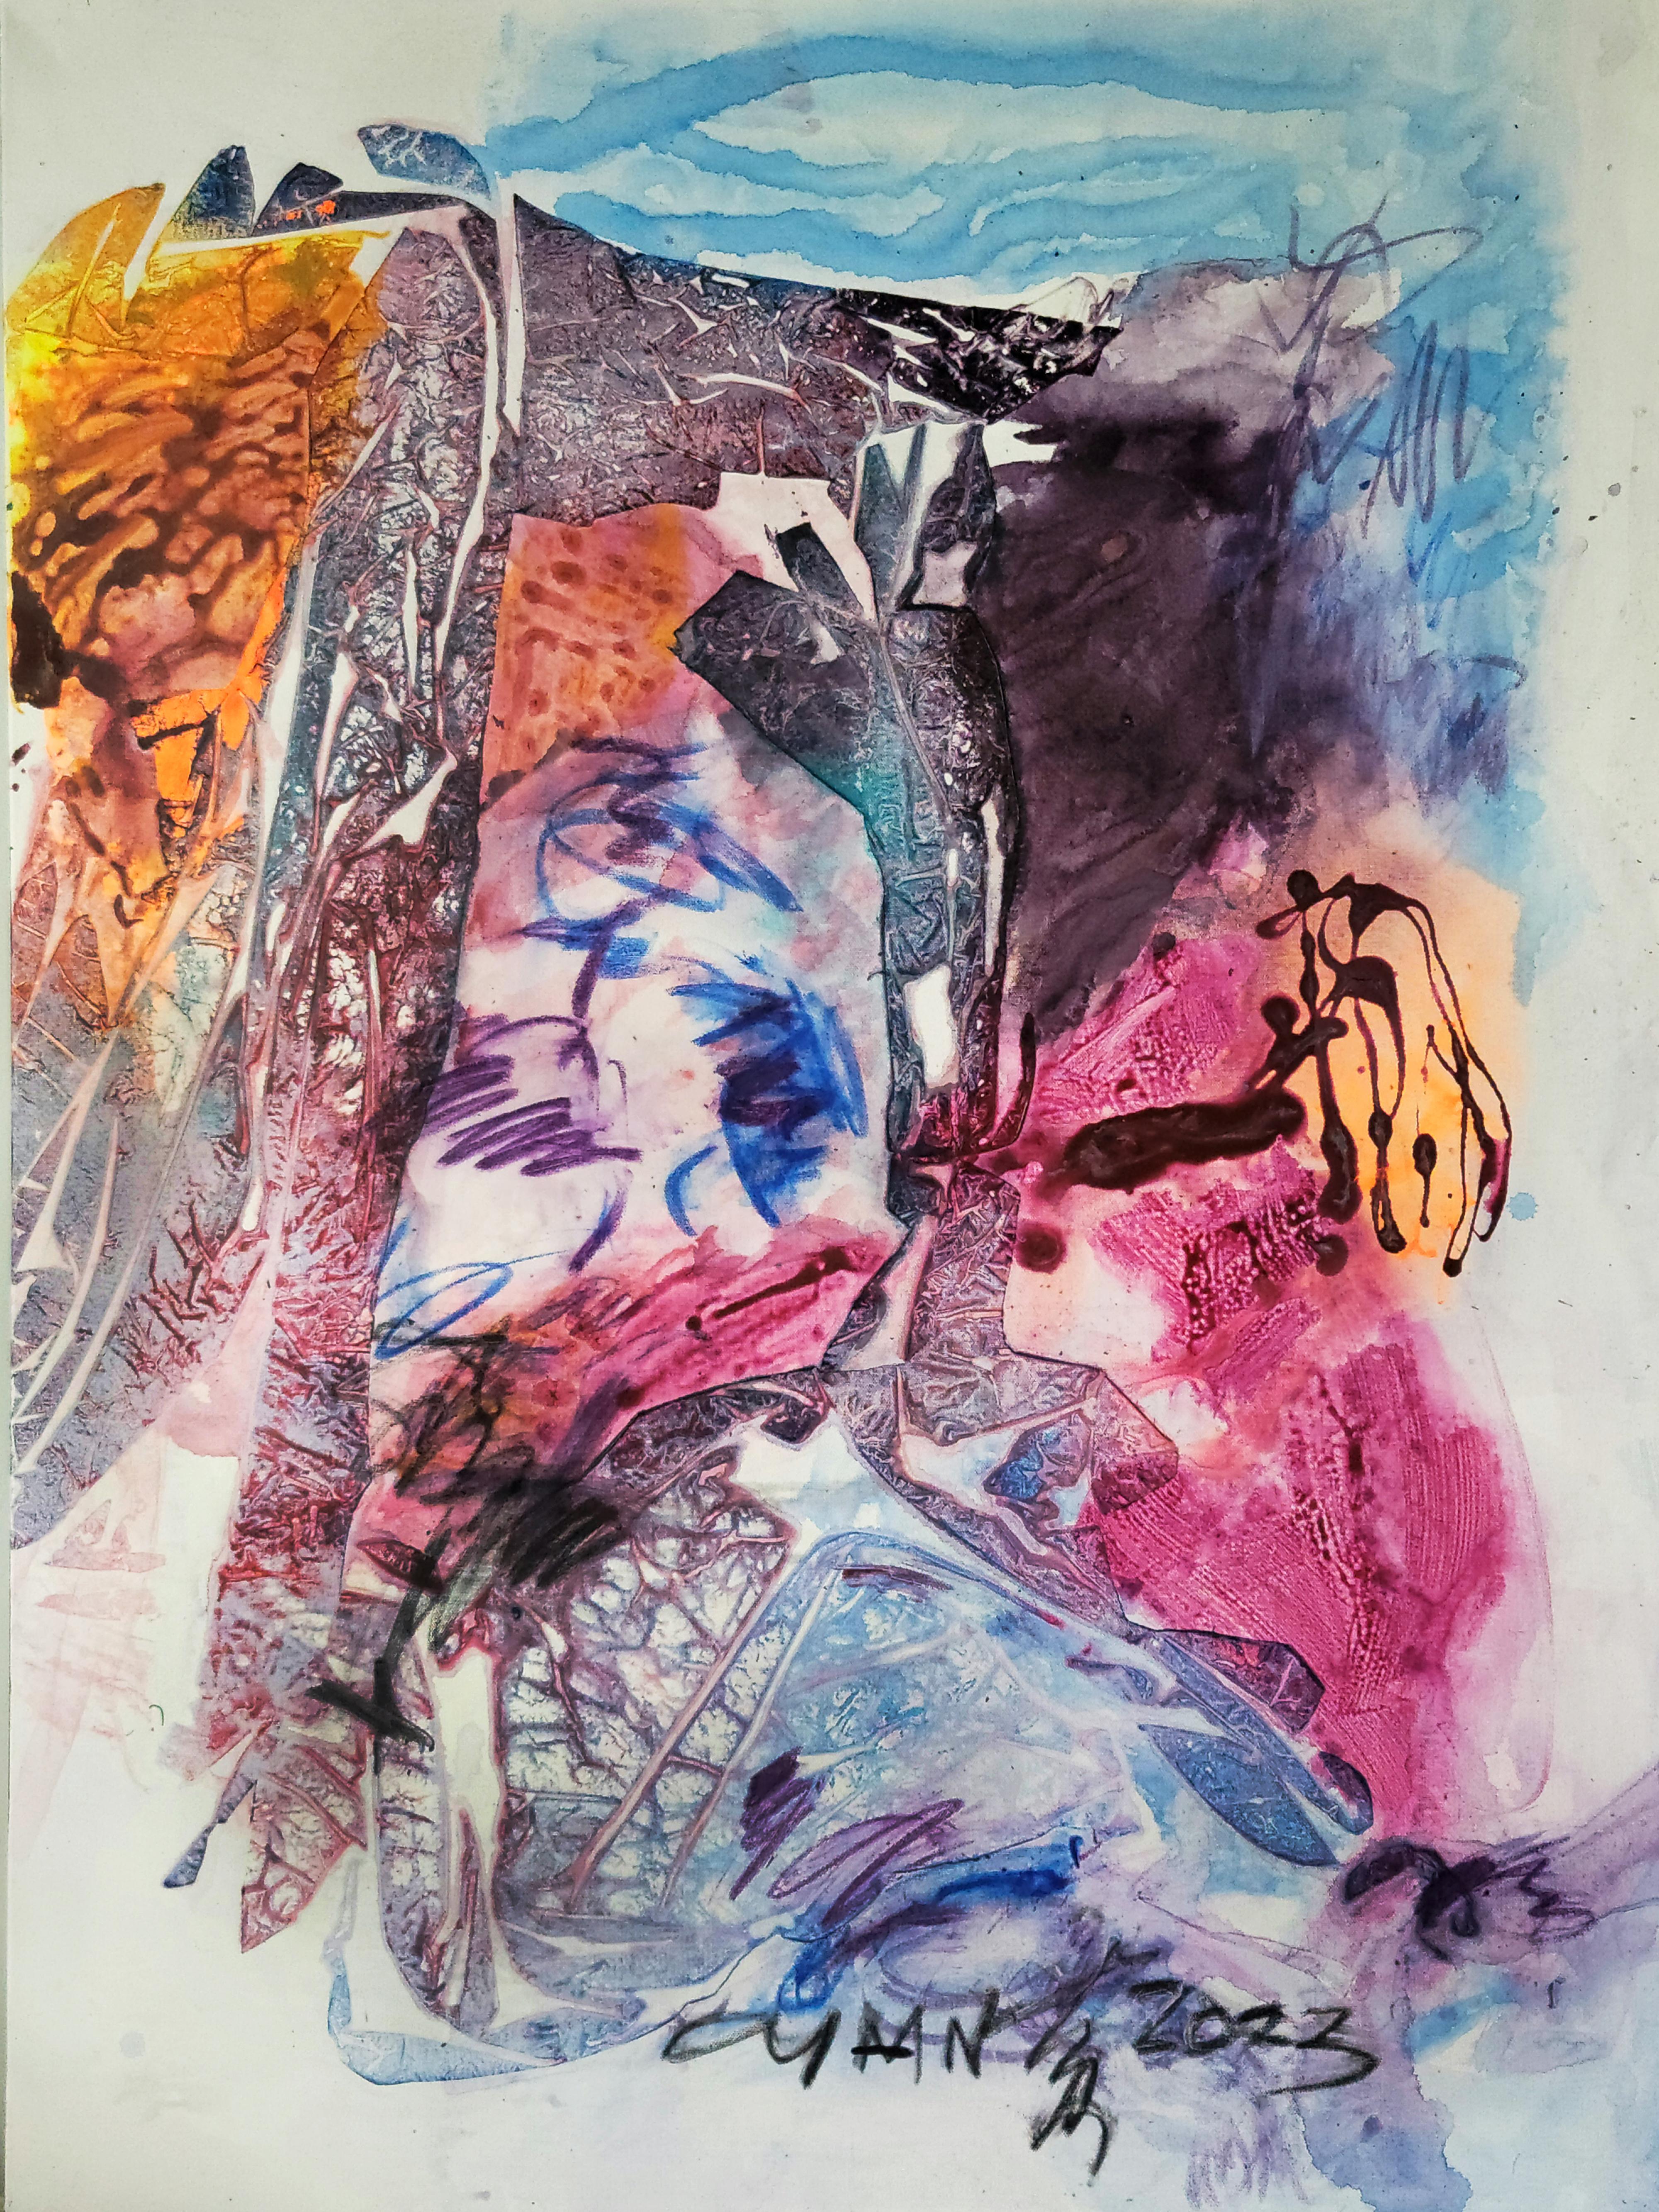 The Seed's Unveiling-Vivid, Rich, Colorful, Expressive Abstract, Zen Calligraphy - Painting by Cymn Wong 